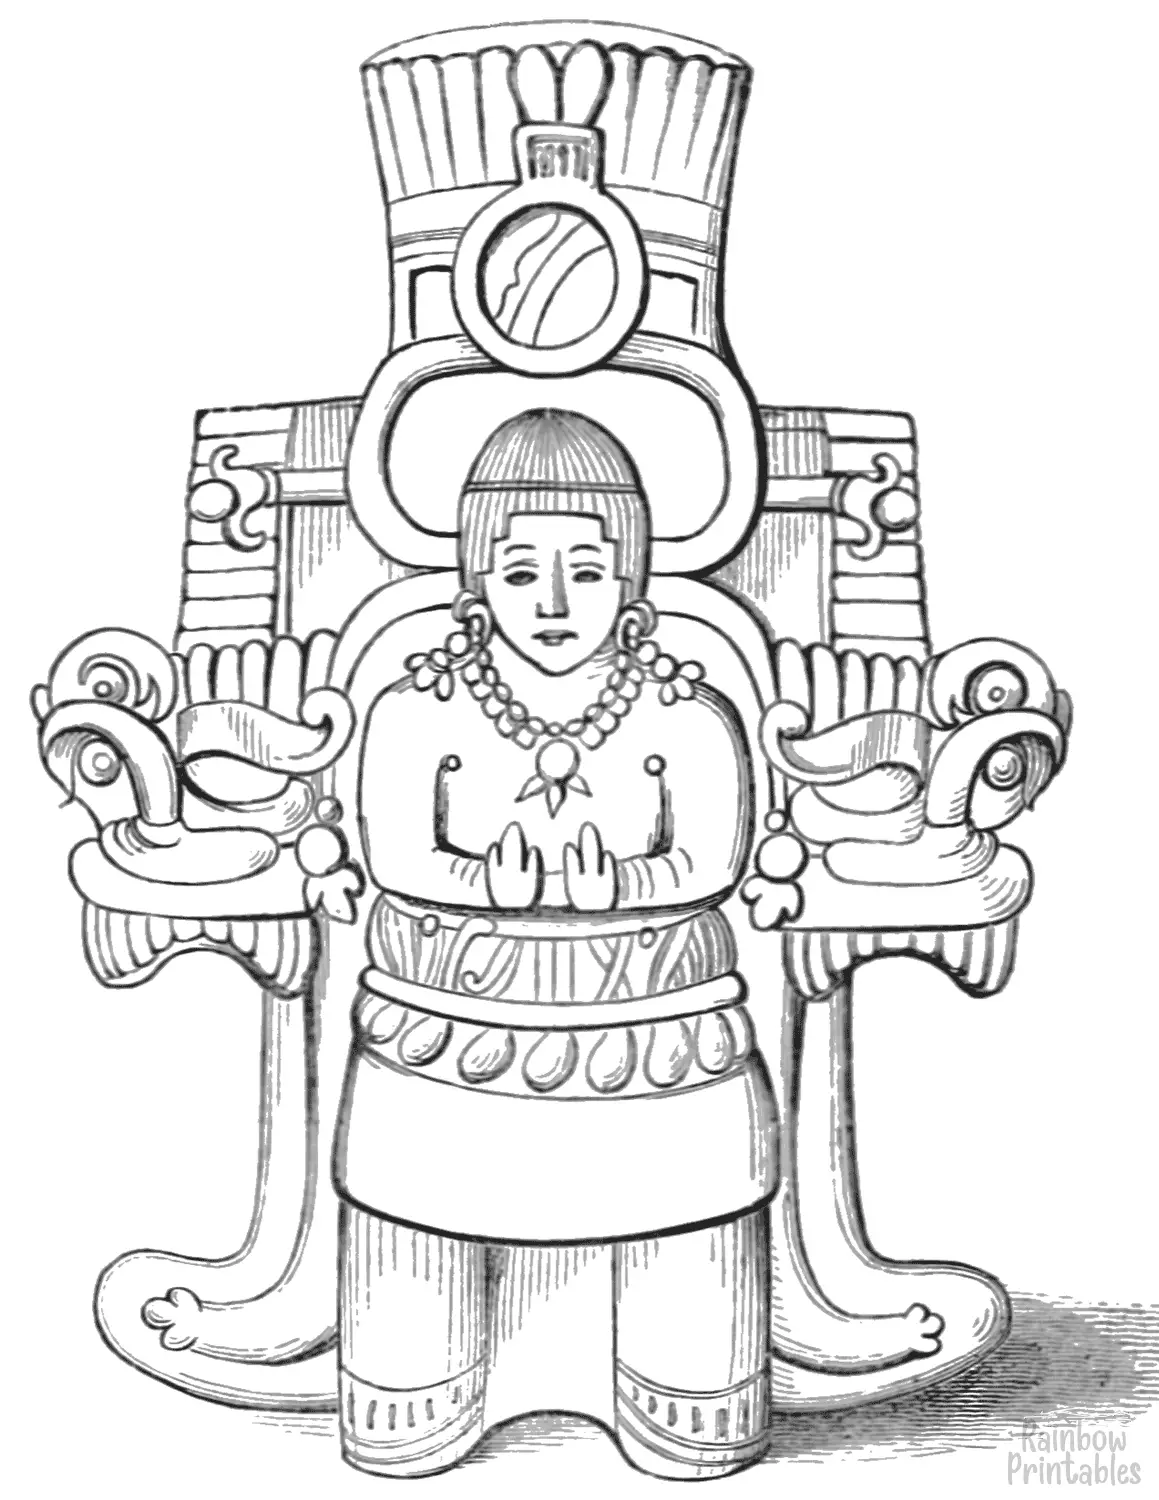 cartoon-line-art-world-cultures-mayan-figure-yucatese-idol-coloring-page-for-kids